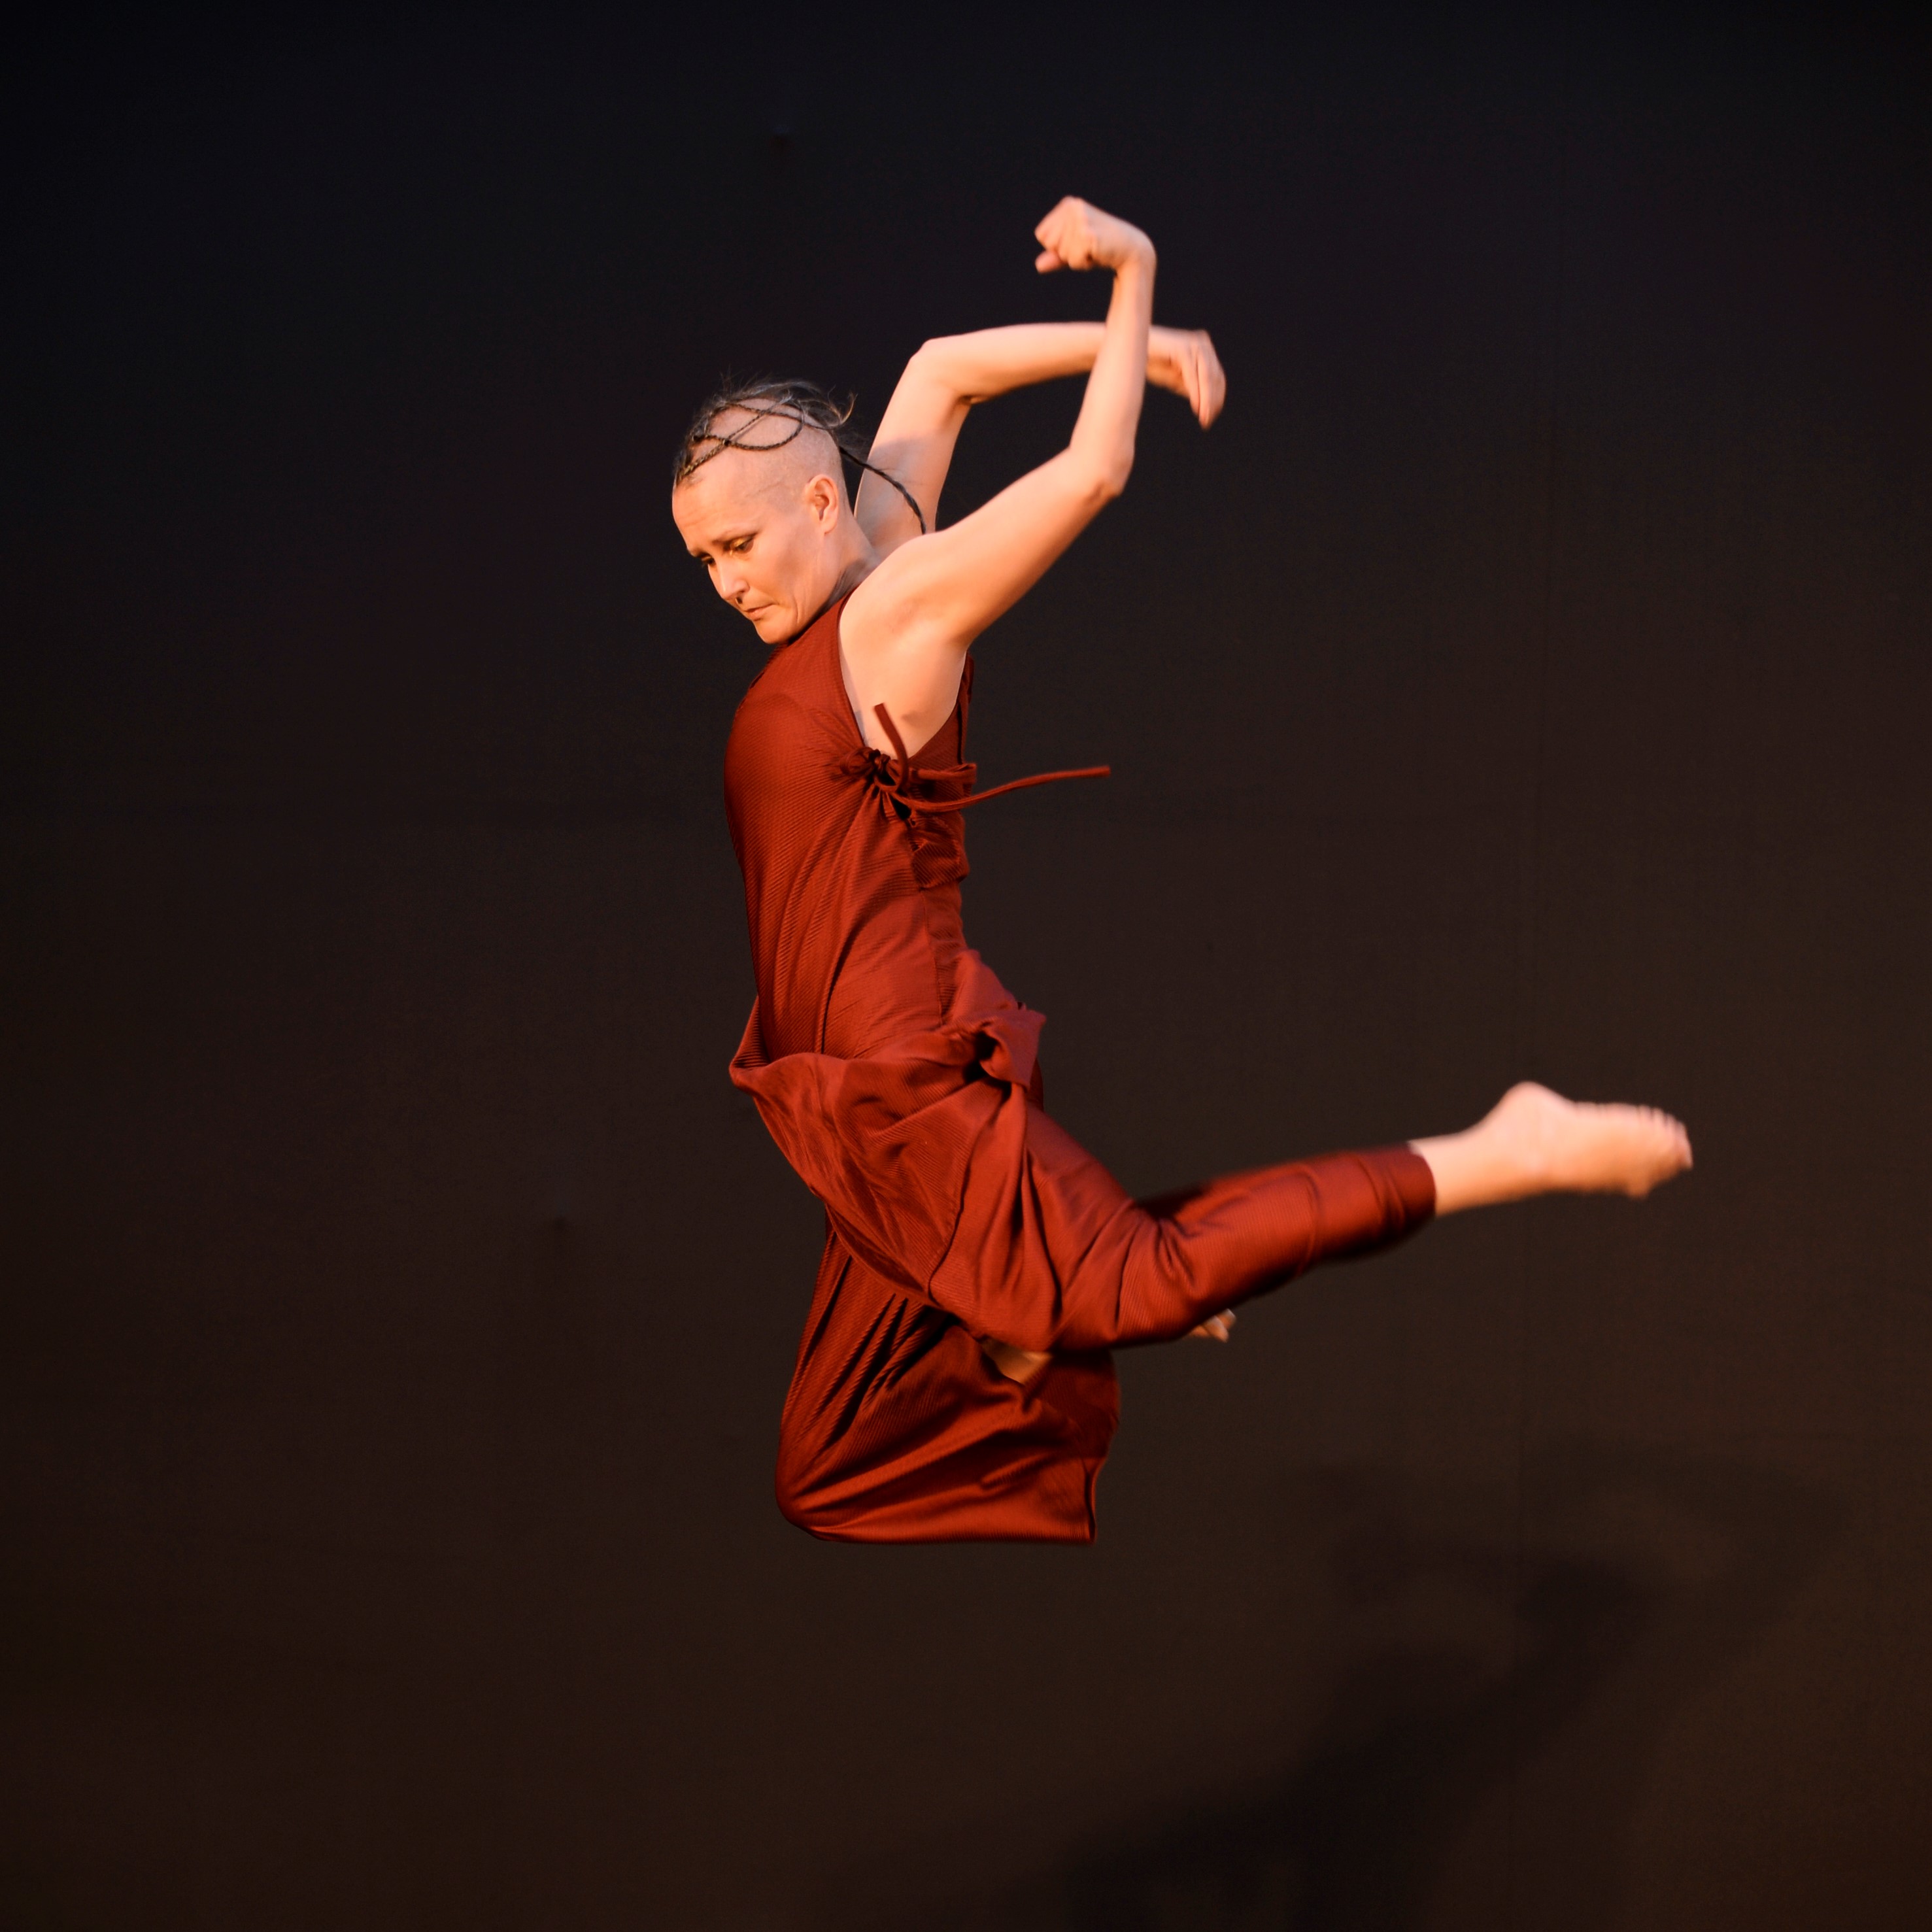 Dancer dressed in maroon silk with arms and legs behind them while they jump in the air